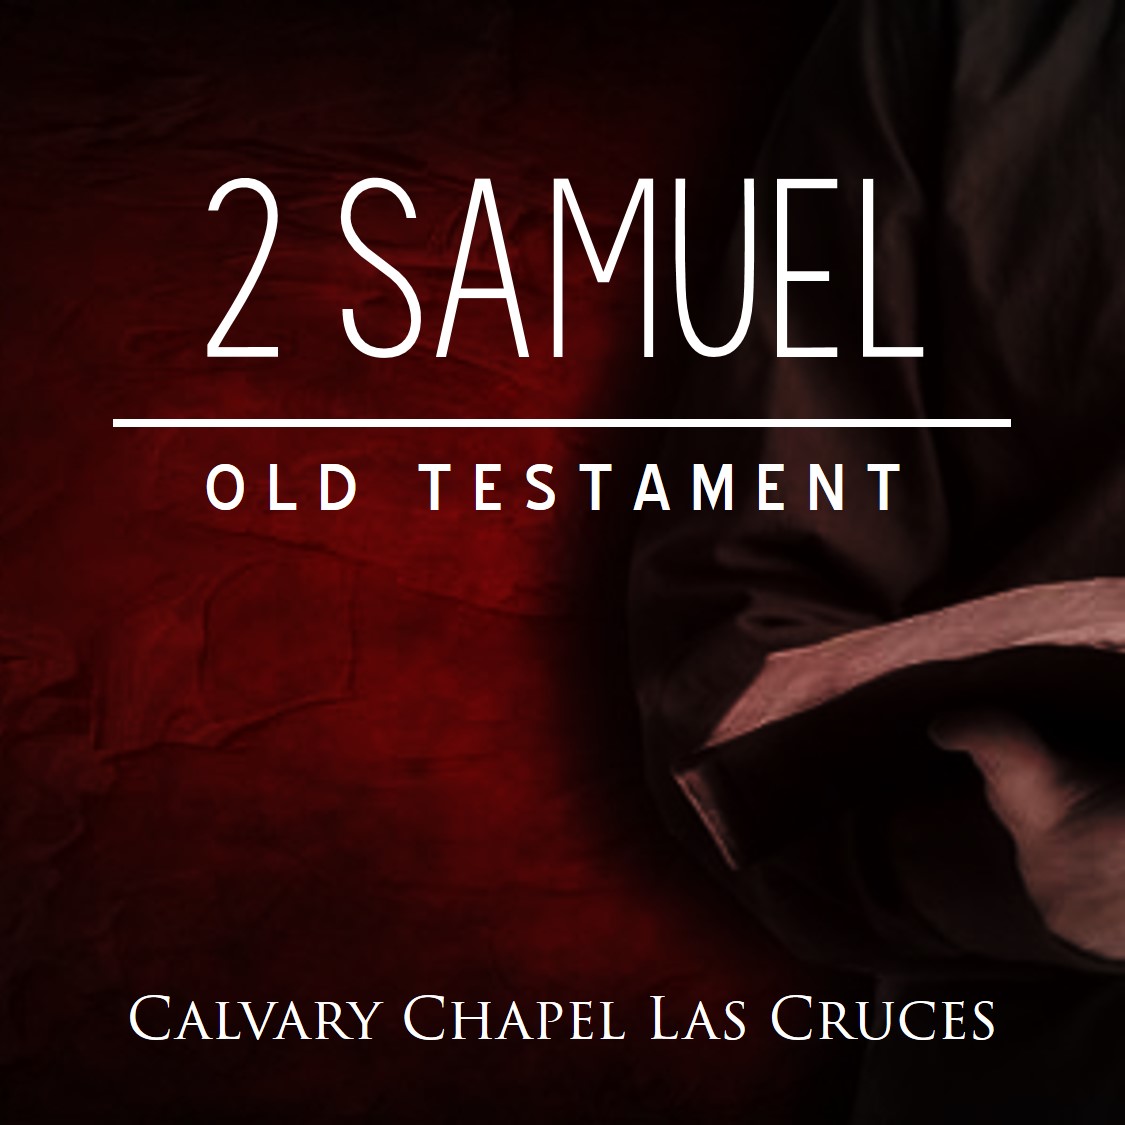 2 Samuel Chapter 10 - "King David Defeats the Ammonites and Syrians"